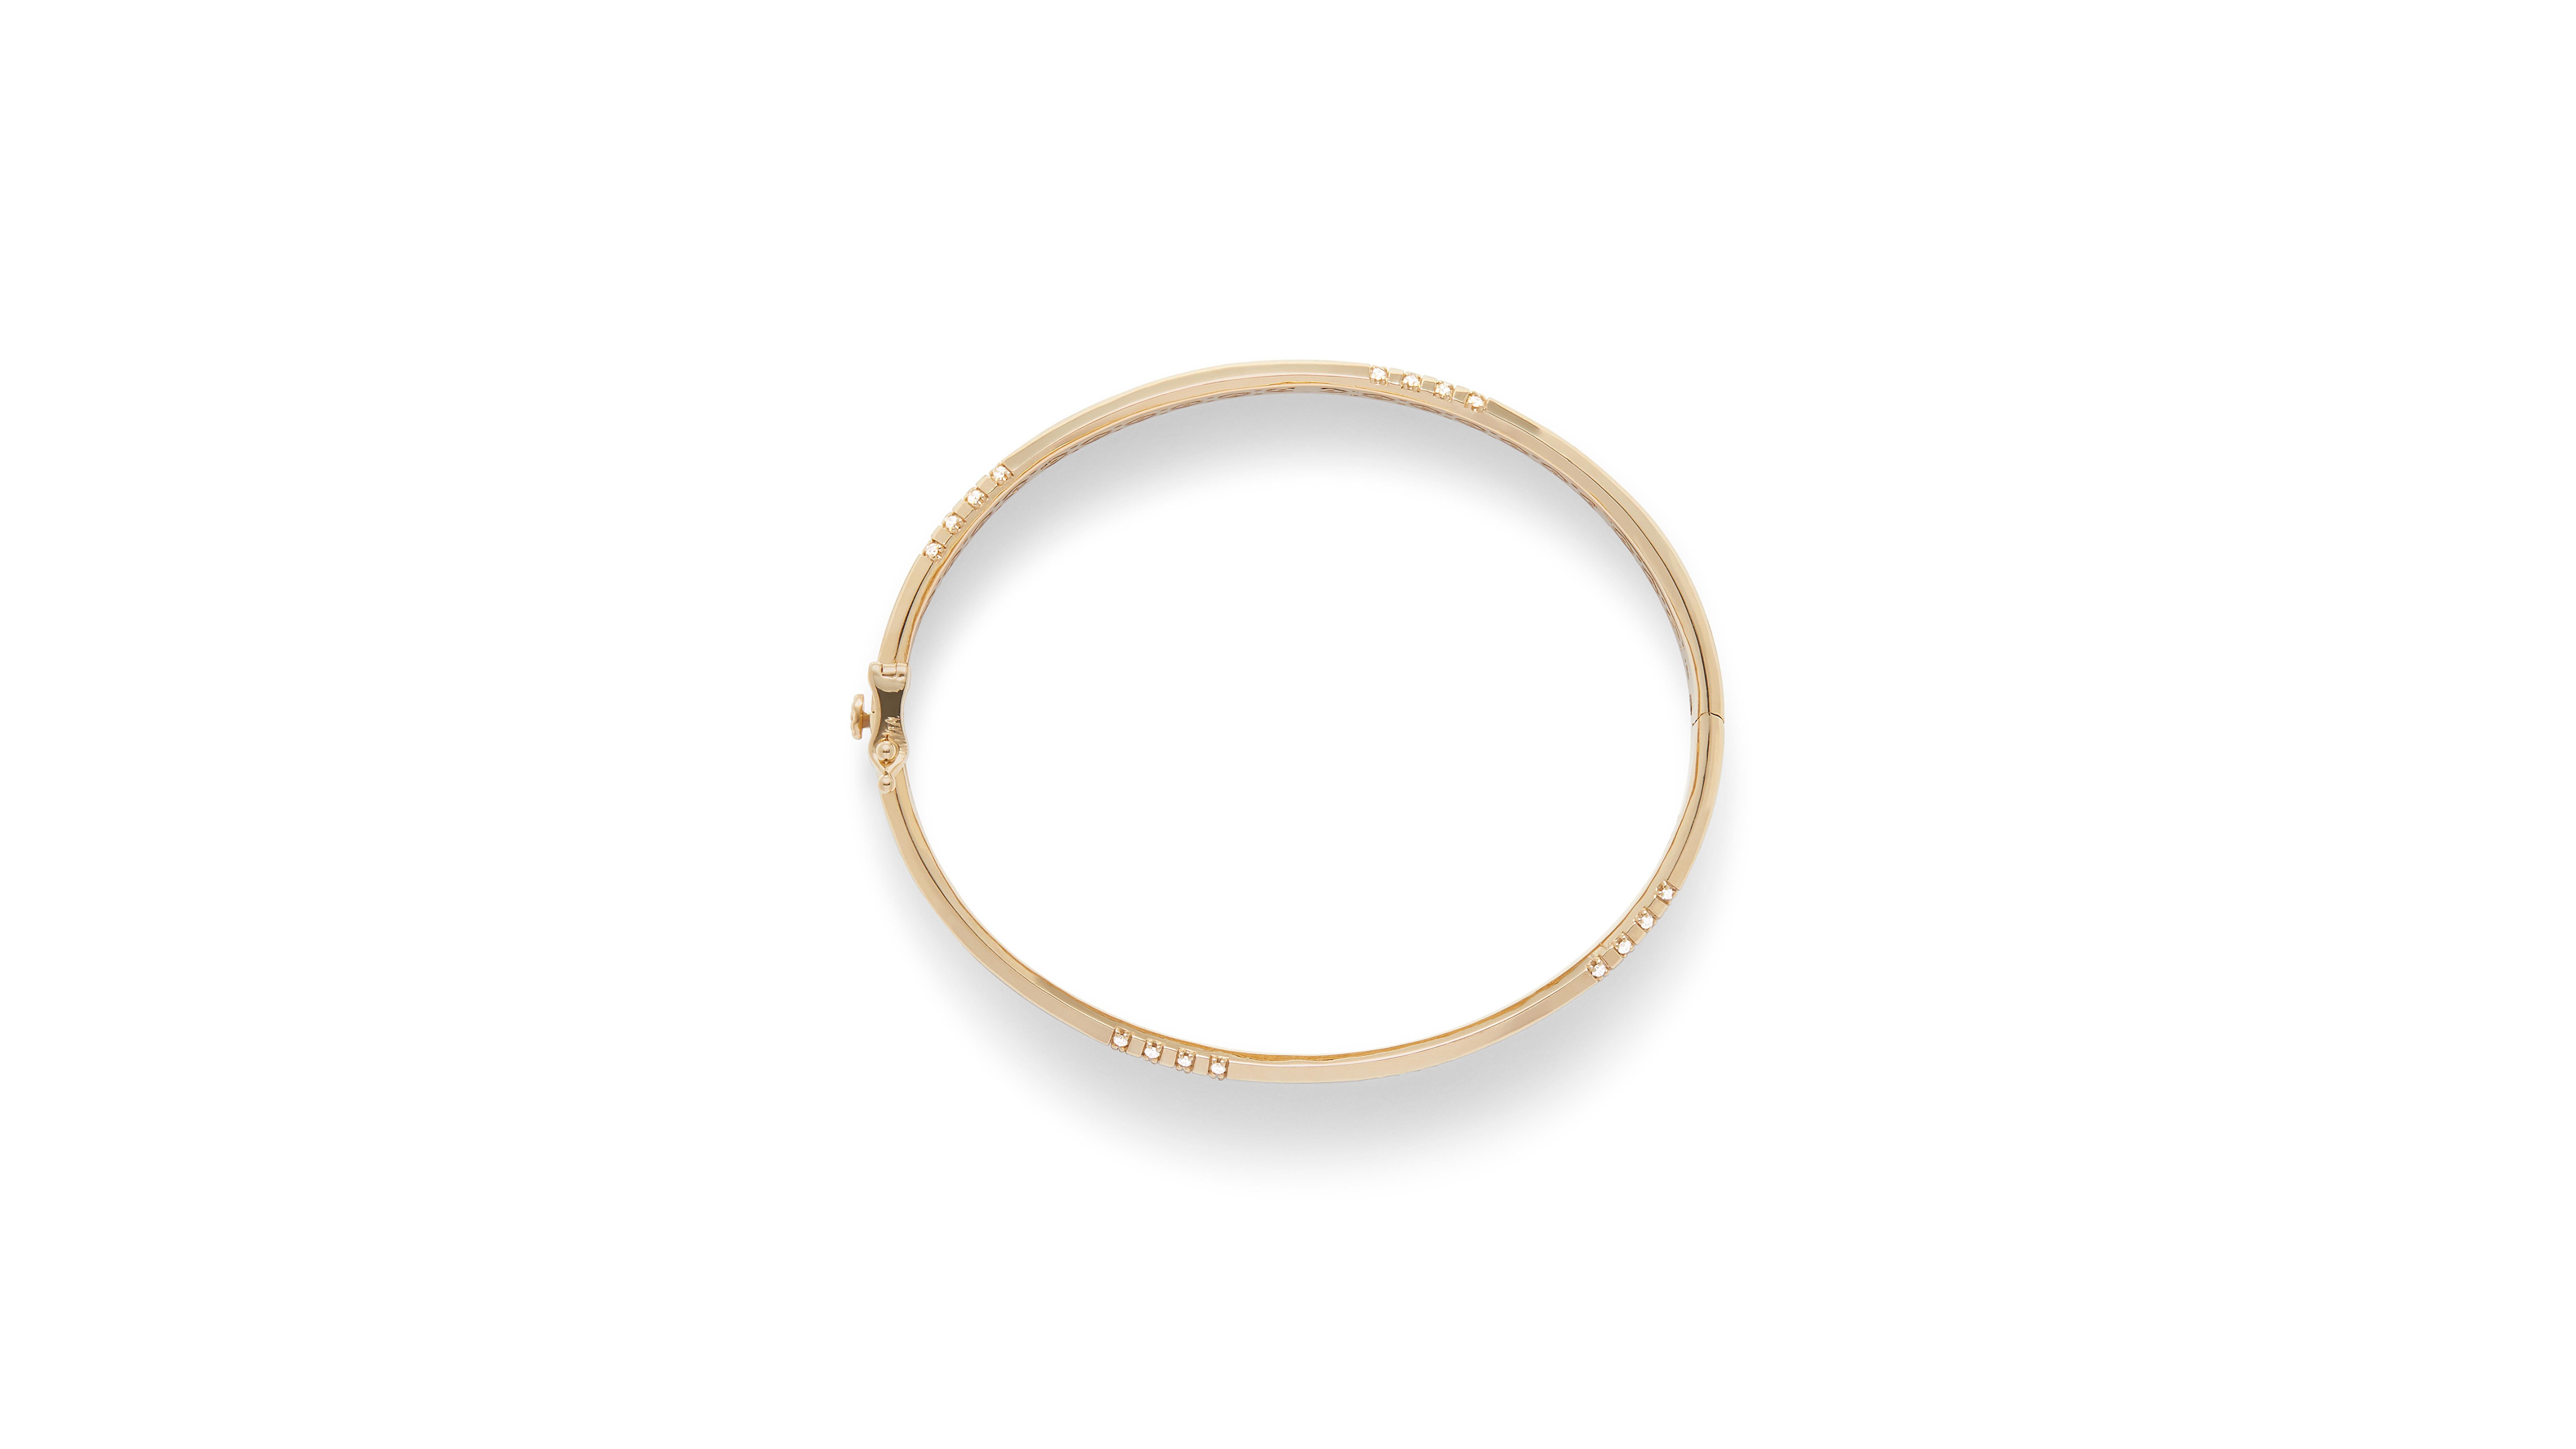 This 18K yellow gold natural diamond hinge bangle was inspired by the spindle pattern found in traditional Mudcloth textiles from the African diaspora.

Matte and high polished finishes bring depth  and dimension to this unique bracelet. The knife